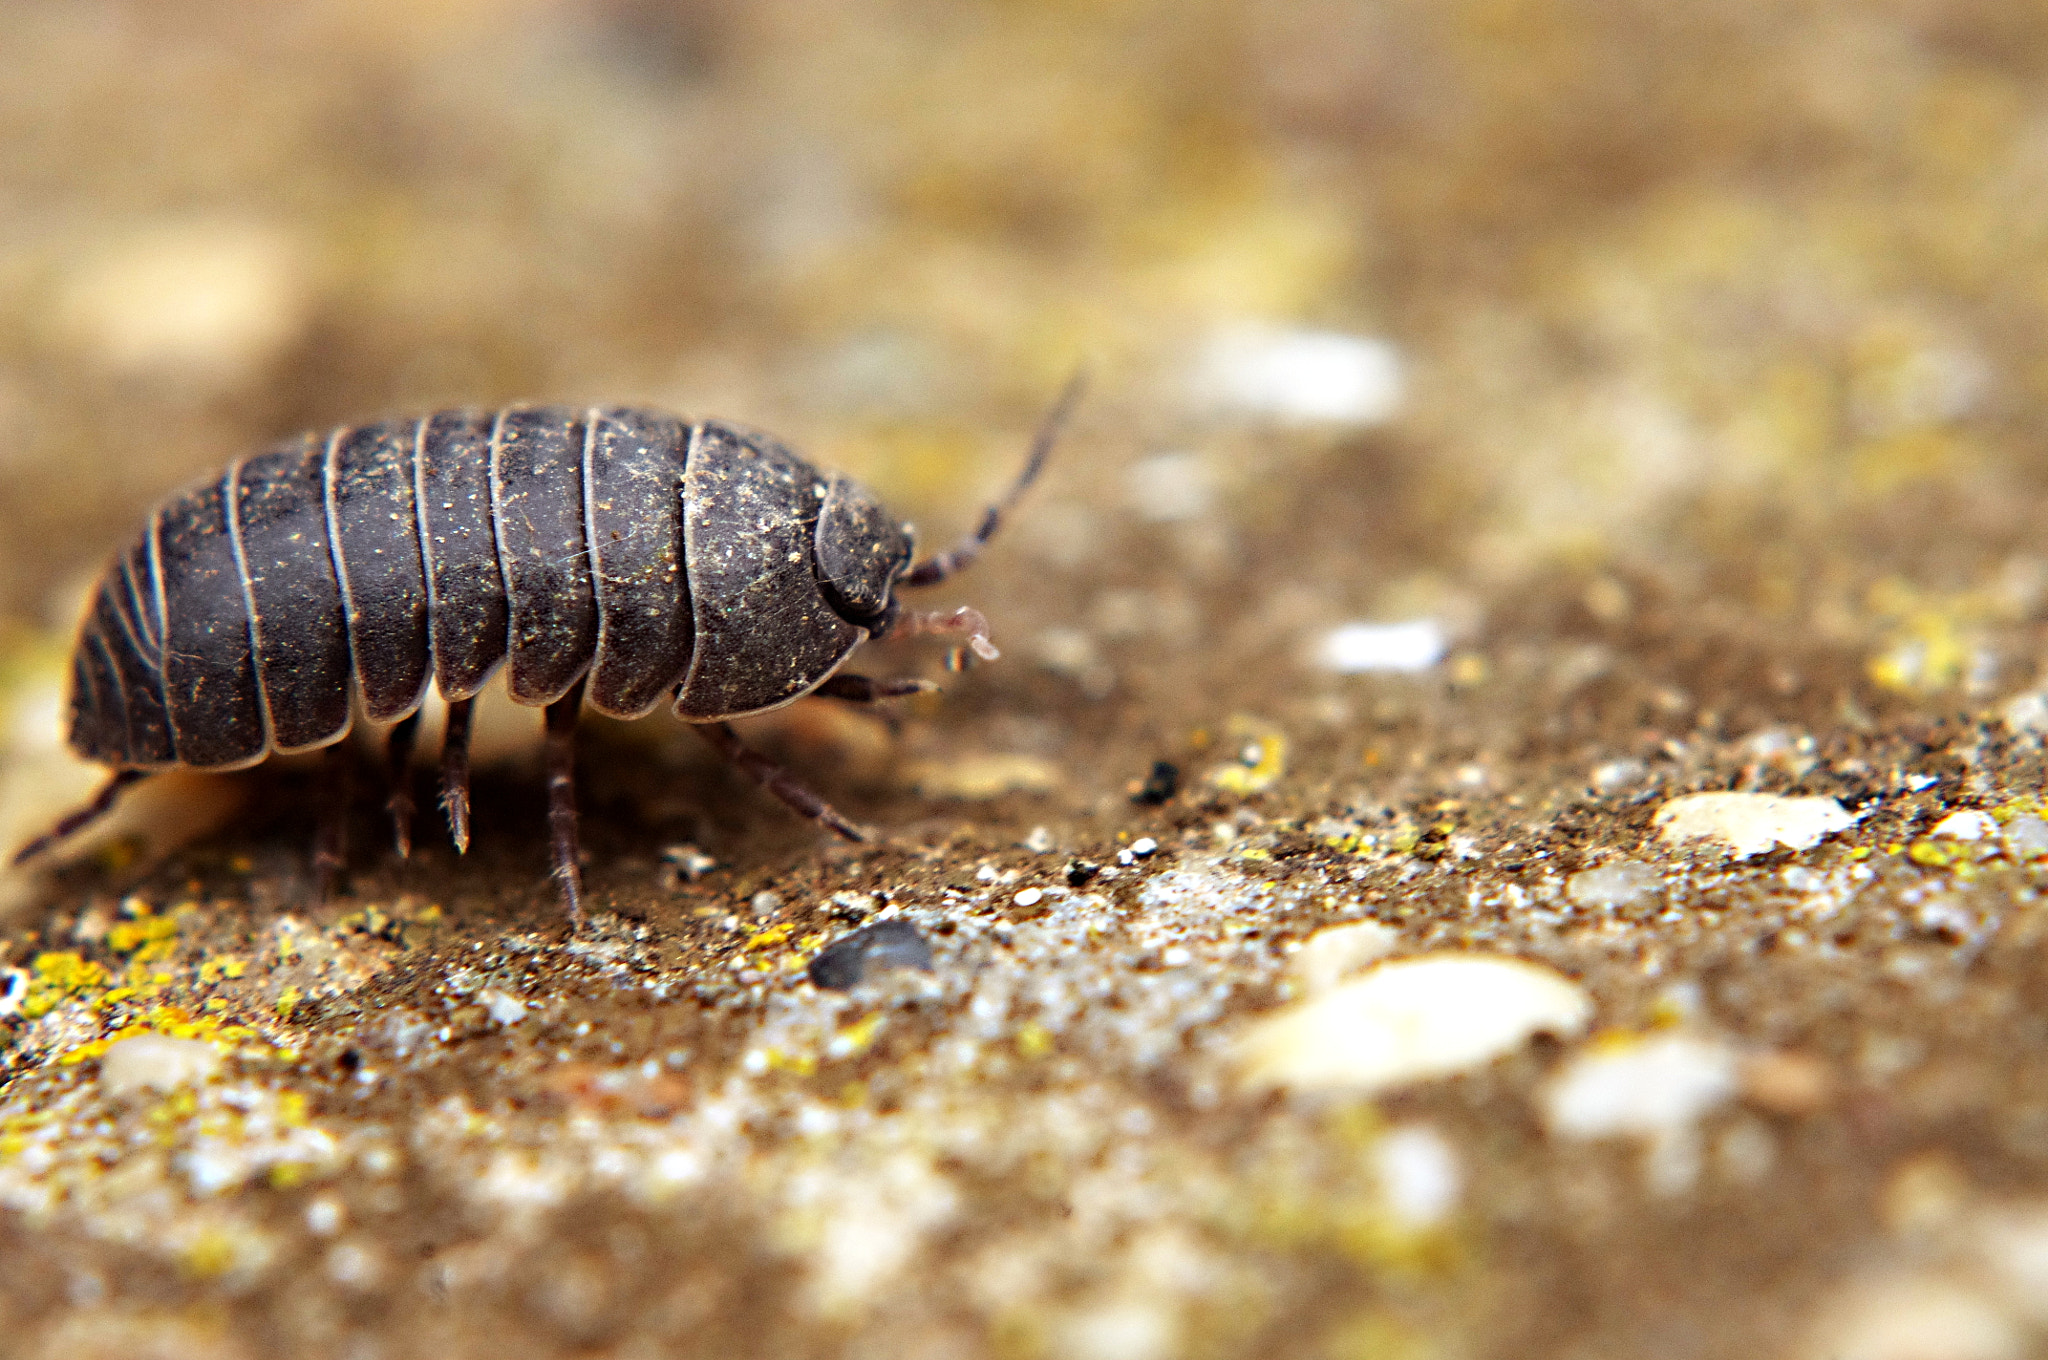 Pentax K-r sample photo. Terrestrial isopod - oniscus asellus photography